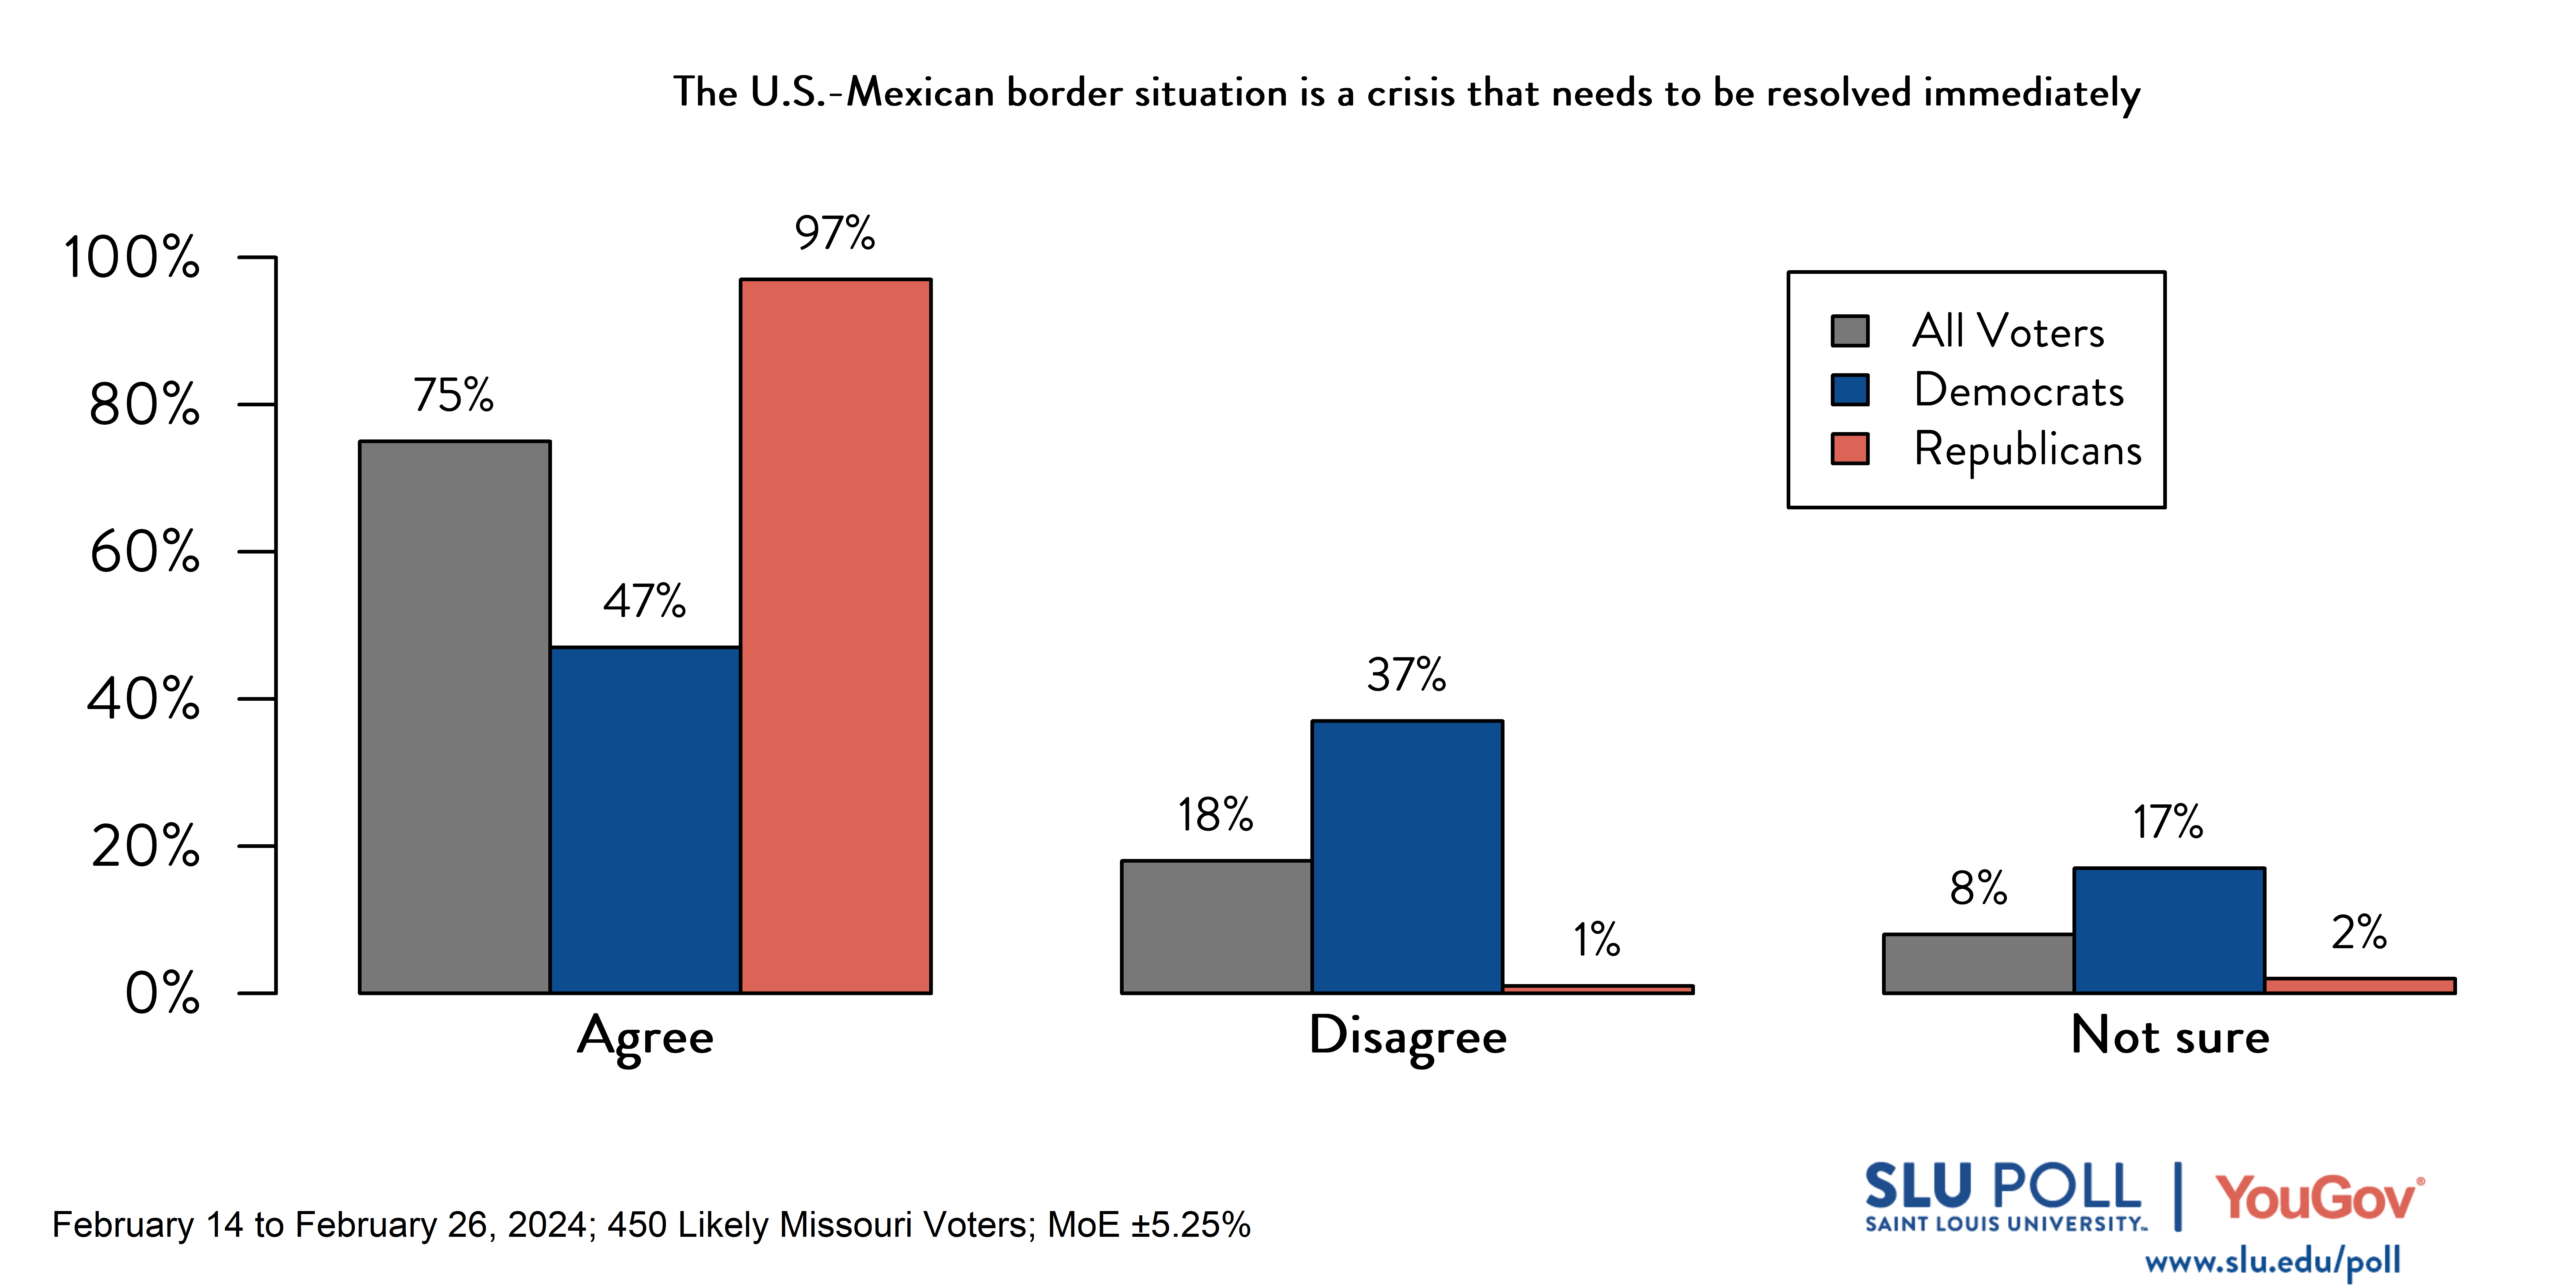 Likely voters' responses to 'Do you agree or disagree with the following statements…The U.S.-Mexican border situation is a crisis that needs to be resolved immediately?': 75% Agree, 18% Disagree, and 8% Not Sure. Democratic voters' responses: ' 47% Agree, 37% Disagree, and 17% Not Sure. Republican voters' responses:  97% Agree, 1% Disagree, and 2% Not Sure.